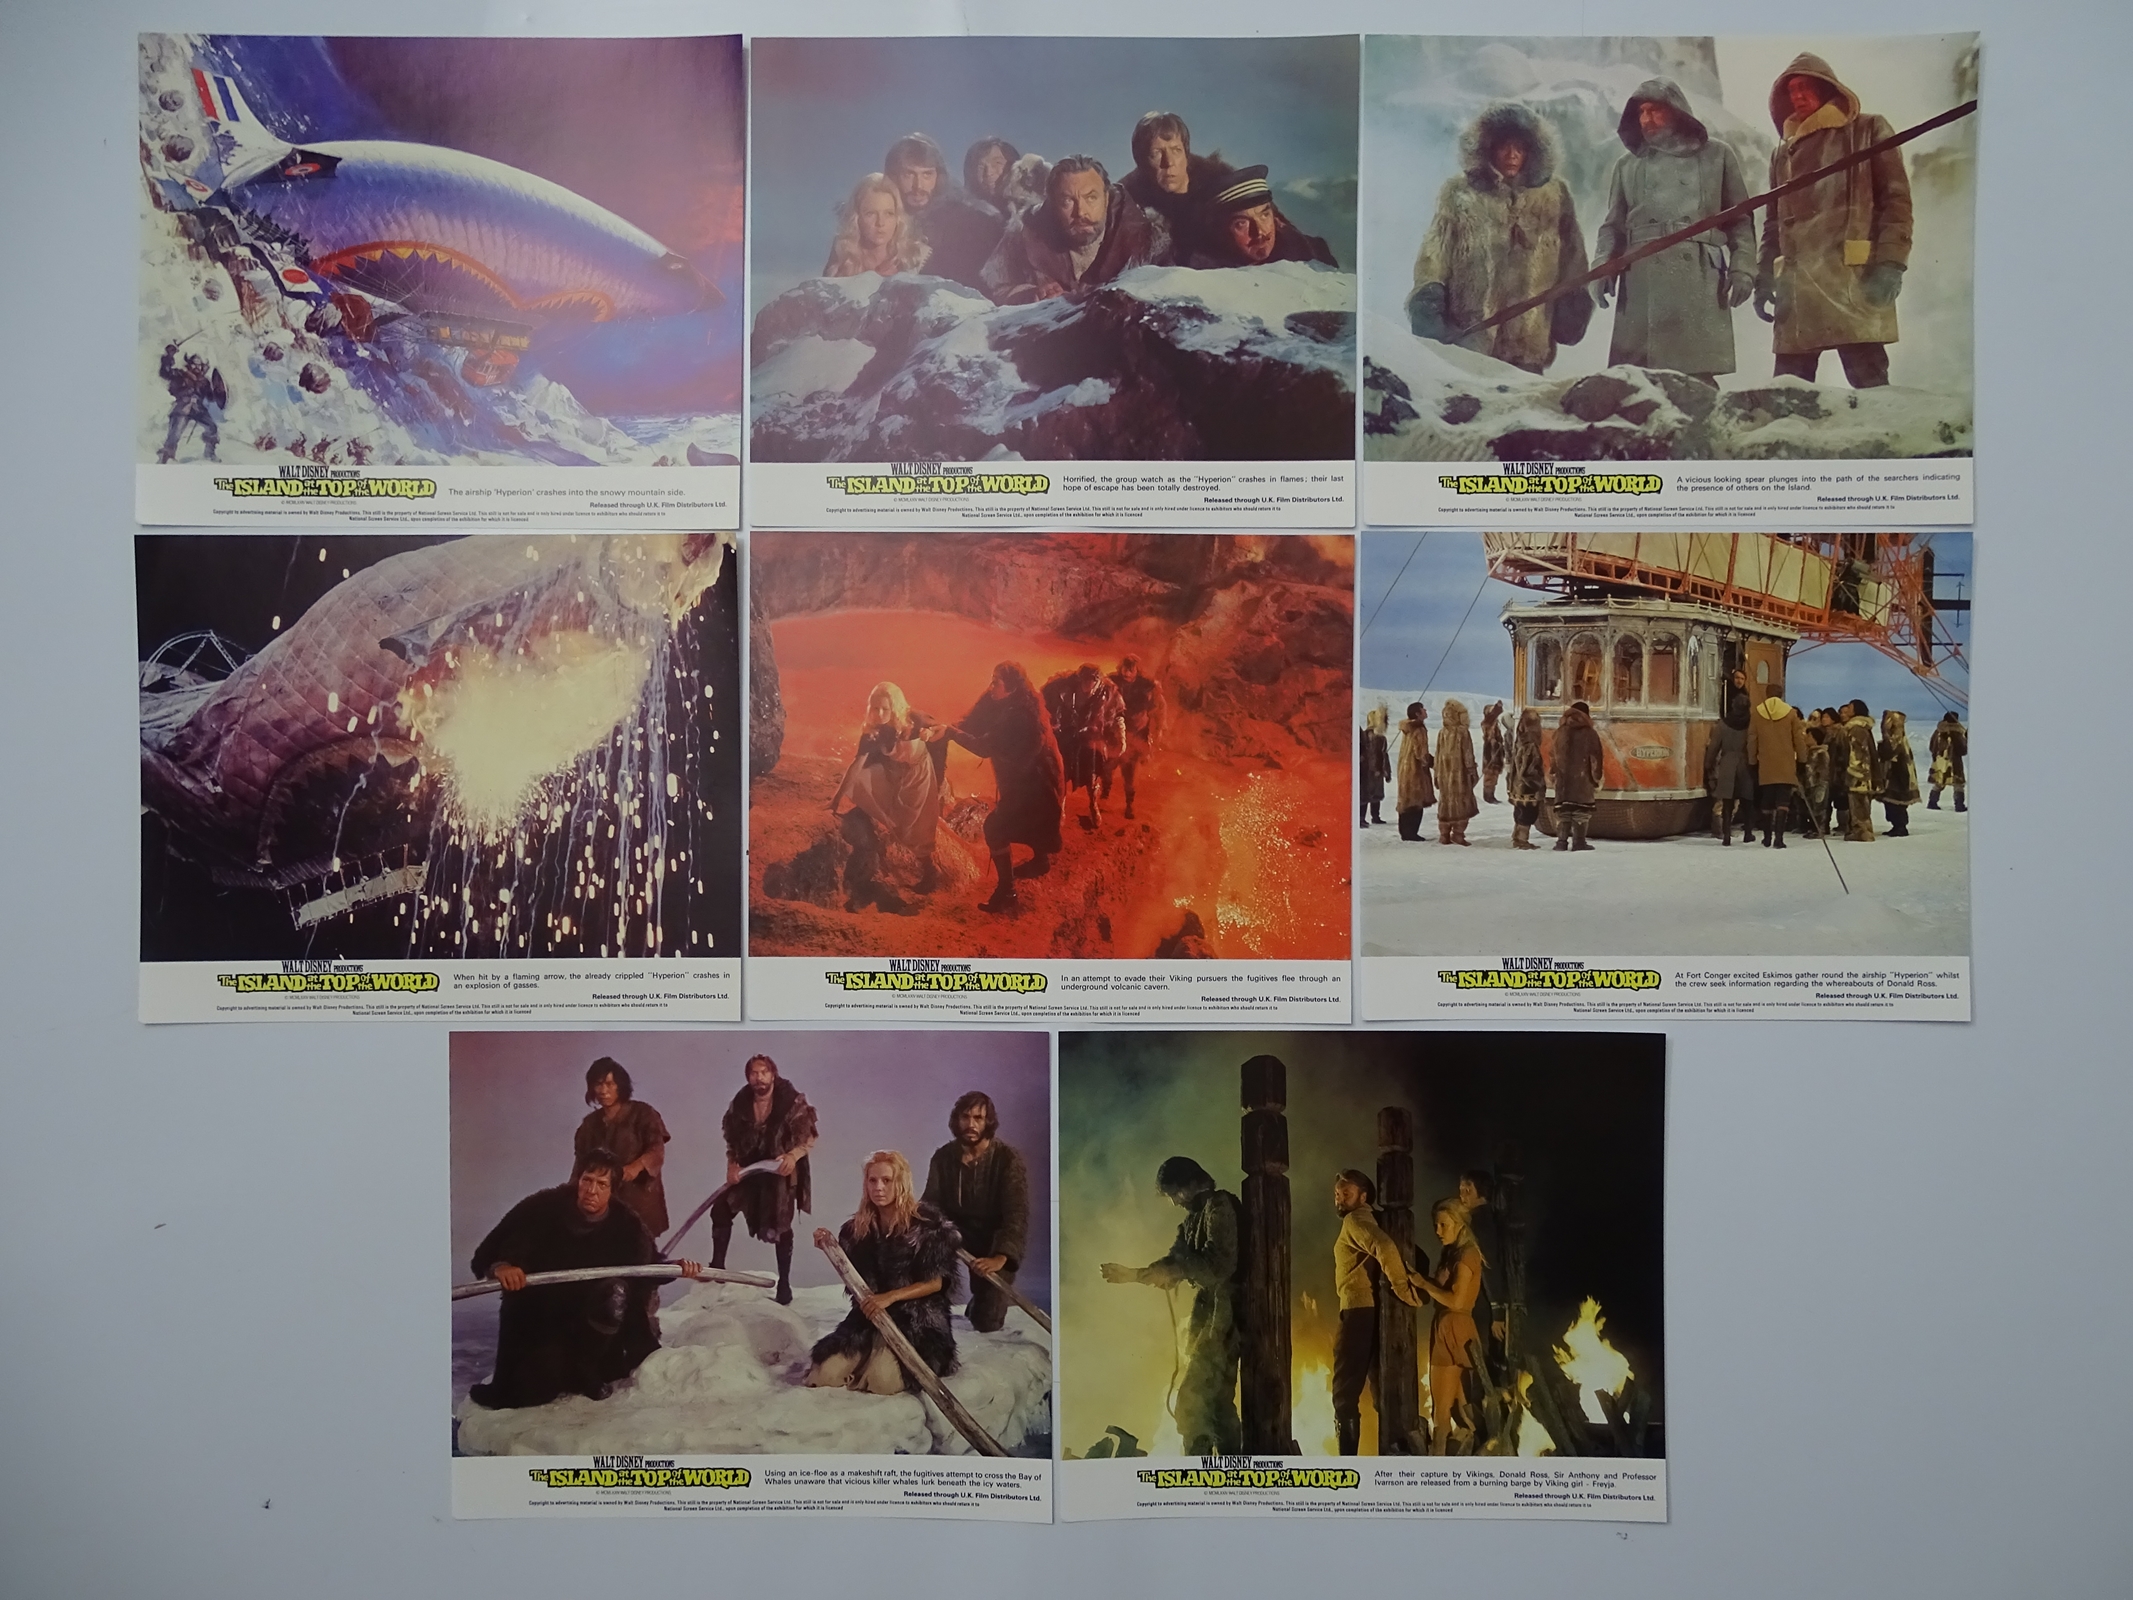 ISLAND AT THE TOP OF THE WORLD LOT (1974) - (3 in Lot) - 2 x UK Quad Film Posters -'Vikings' & " - Image 3 of 3